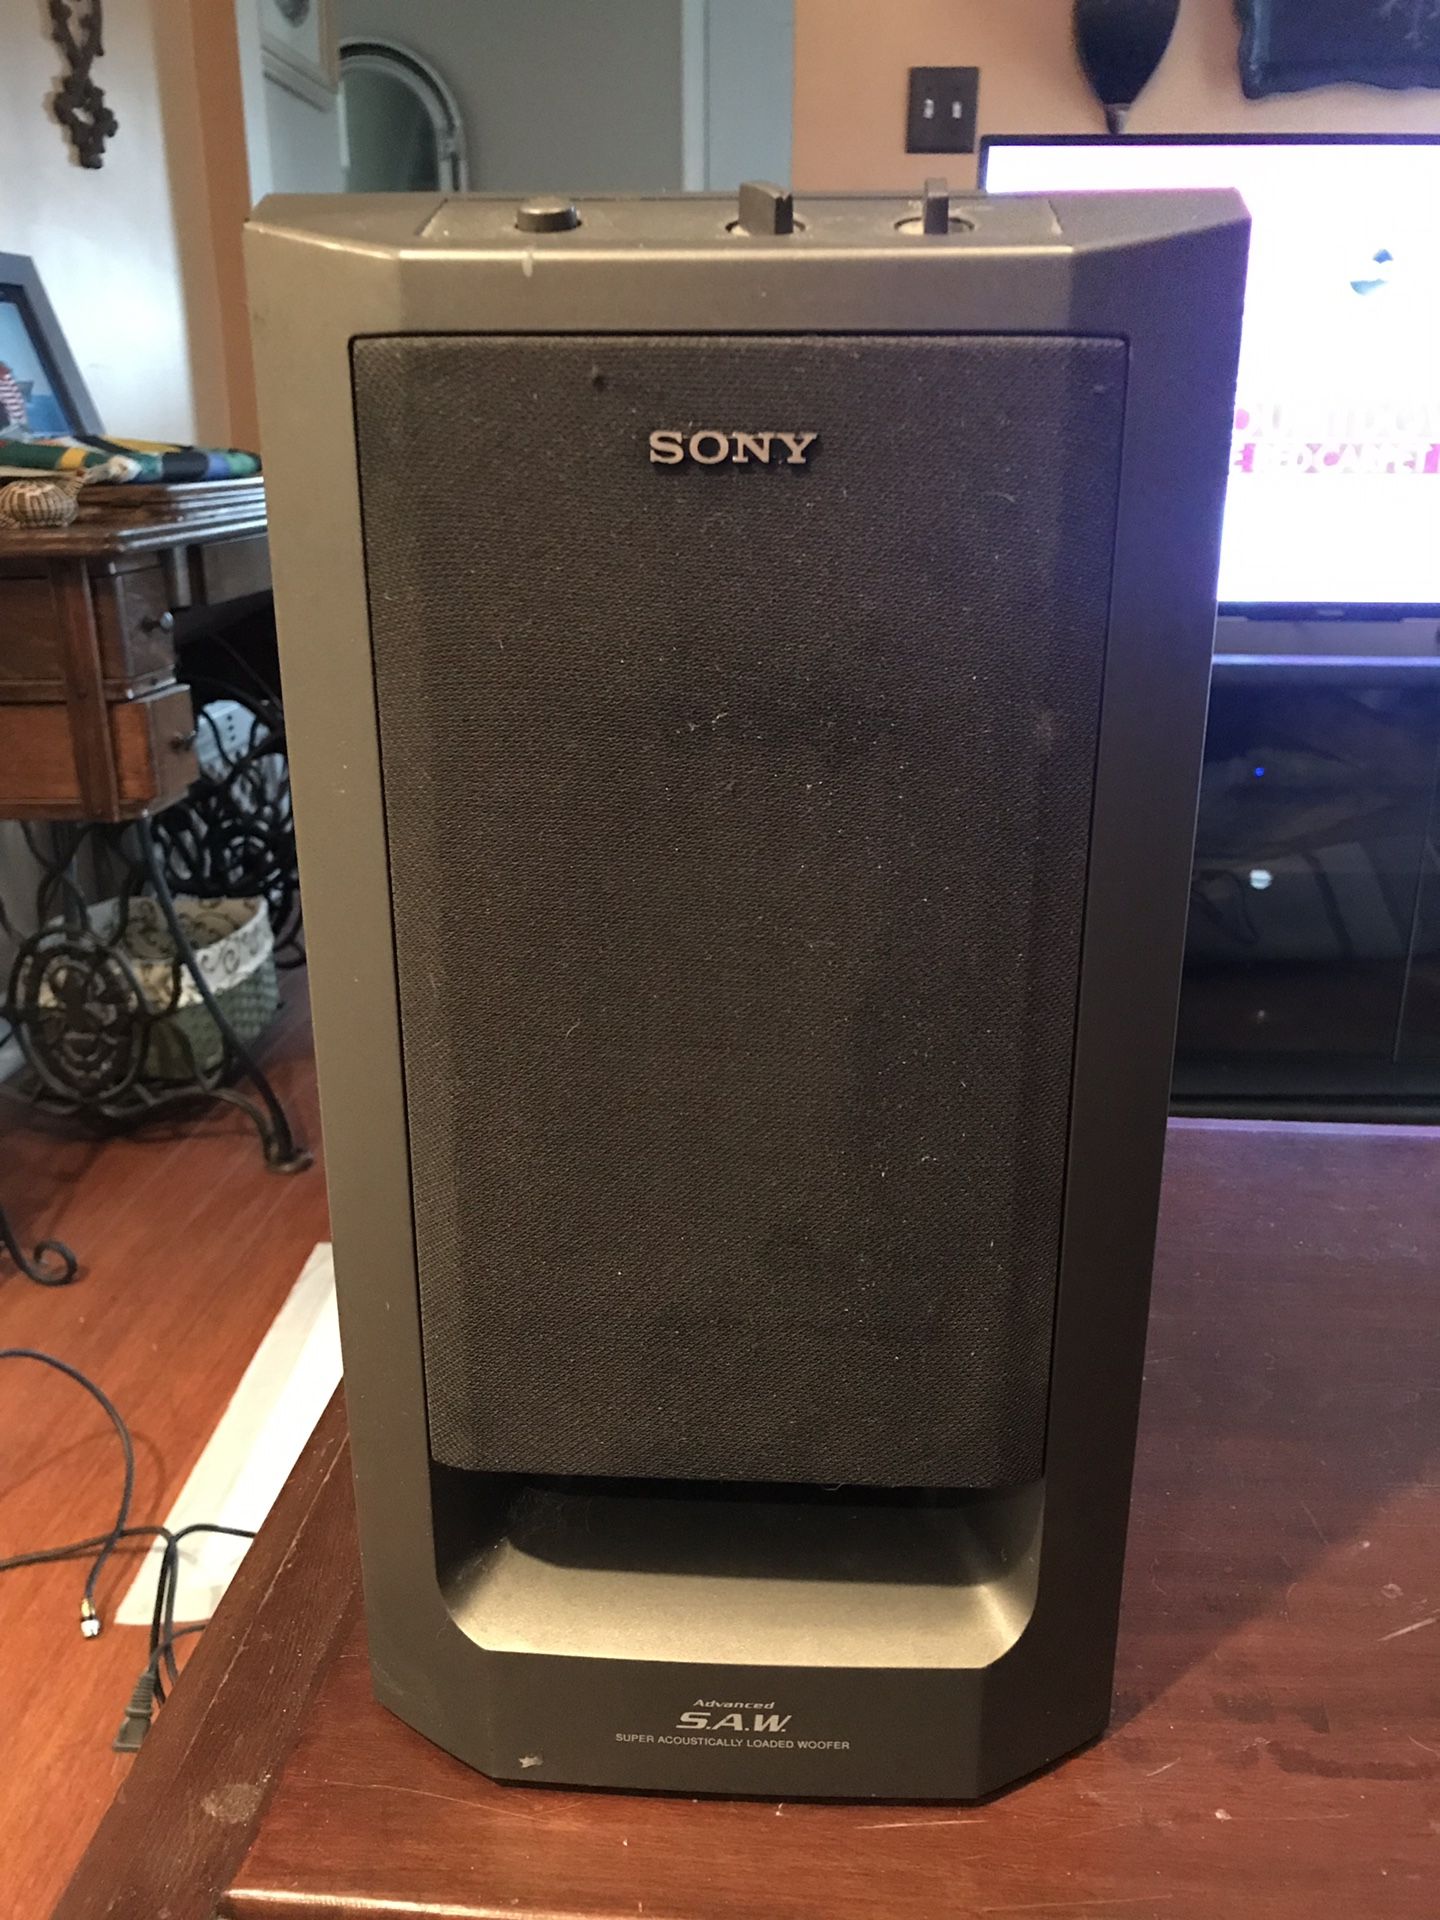 Sony Home Theater Sound System.